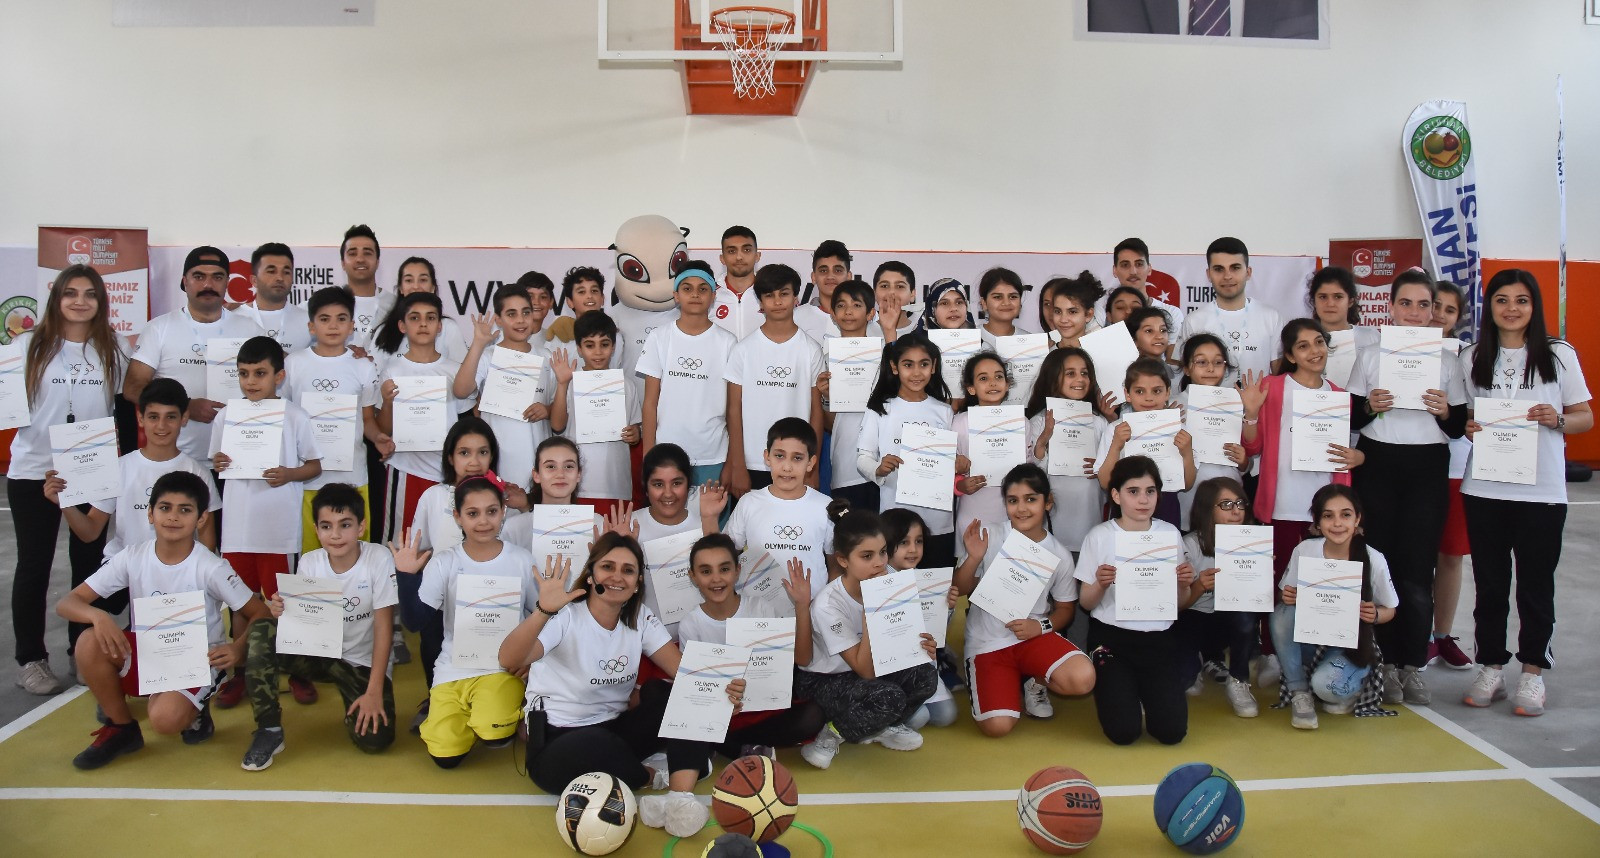 The Turkish Olympic Committee has marked the International Day of Sport for Development and Peace by opening a new sports school for local children and Syrian refugees living in the Kırıkhan district of Hatay City ©TOC